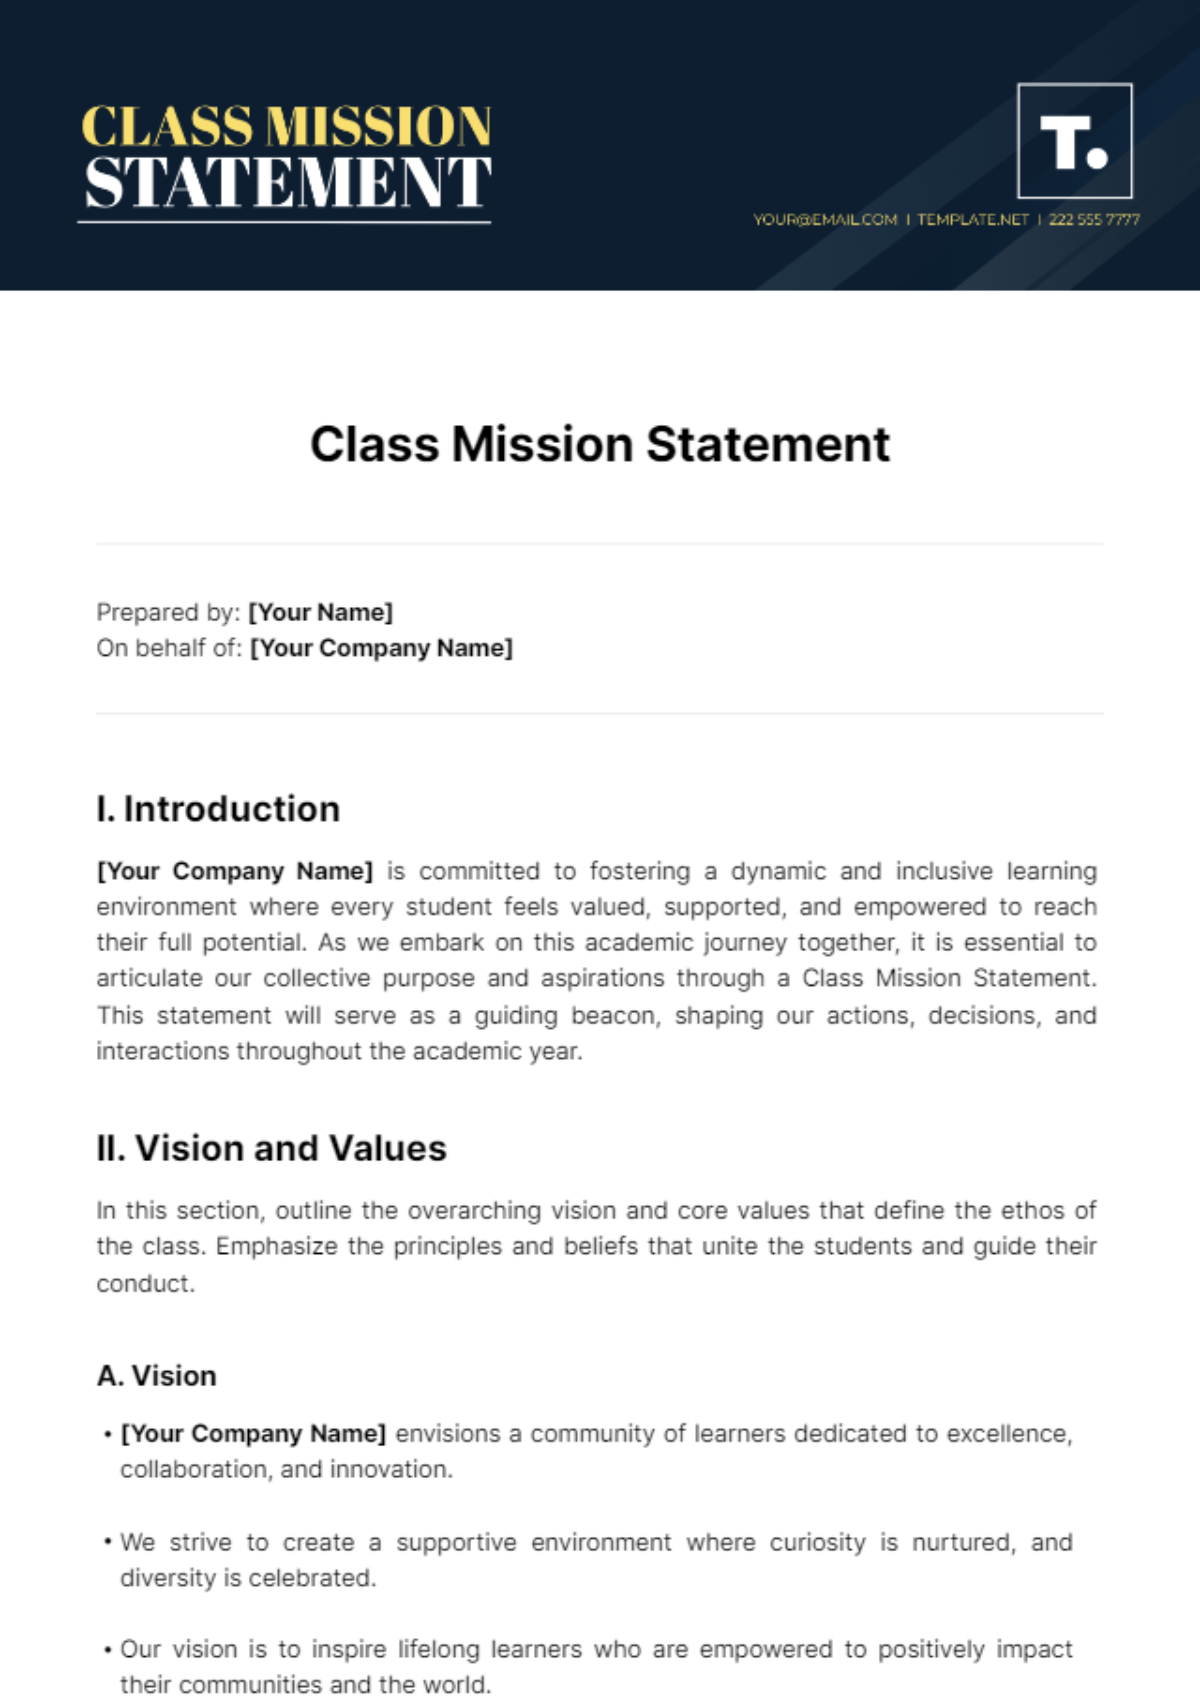 Class Mission Statement Template